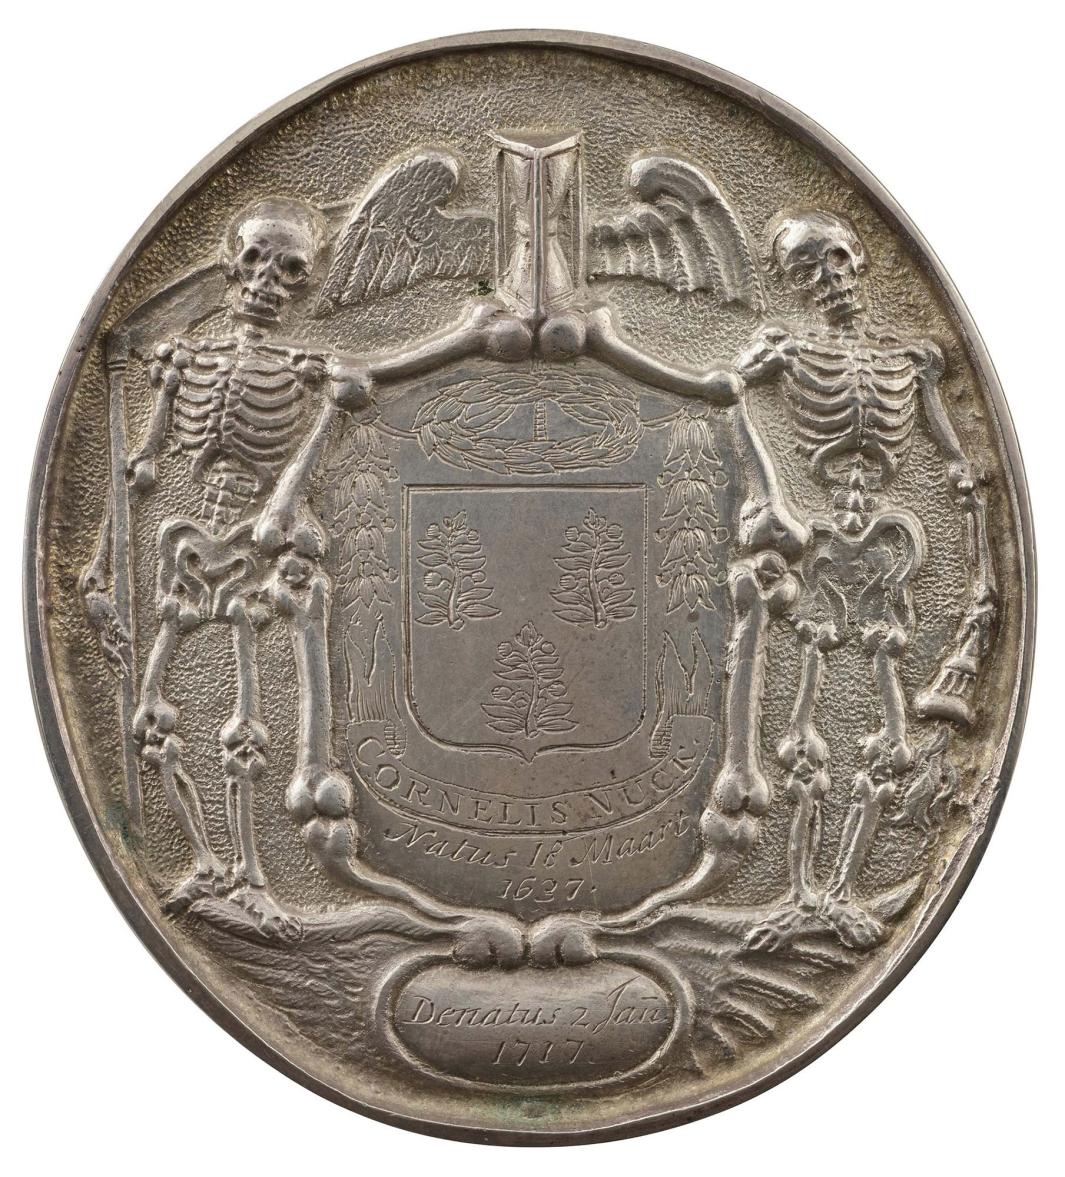 Silver medal of the laureate arms of Cornelius Nuck within a border of bones, upon which rests a winged (bat and bird wings) hourglass 